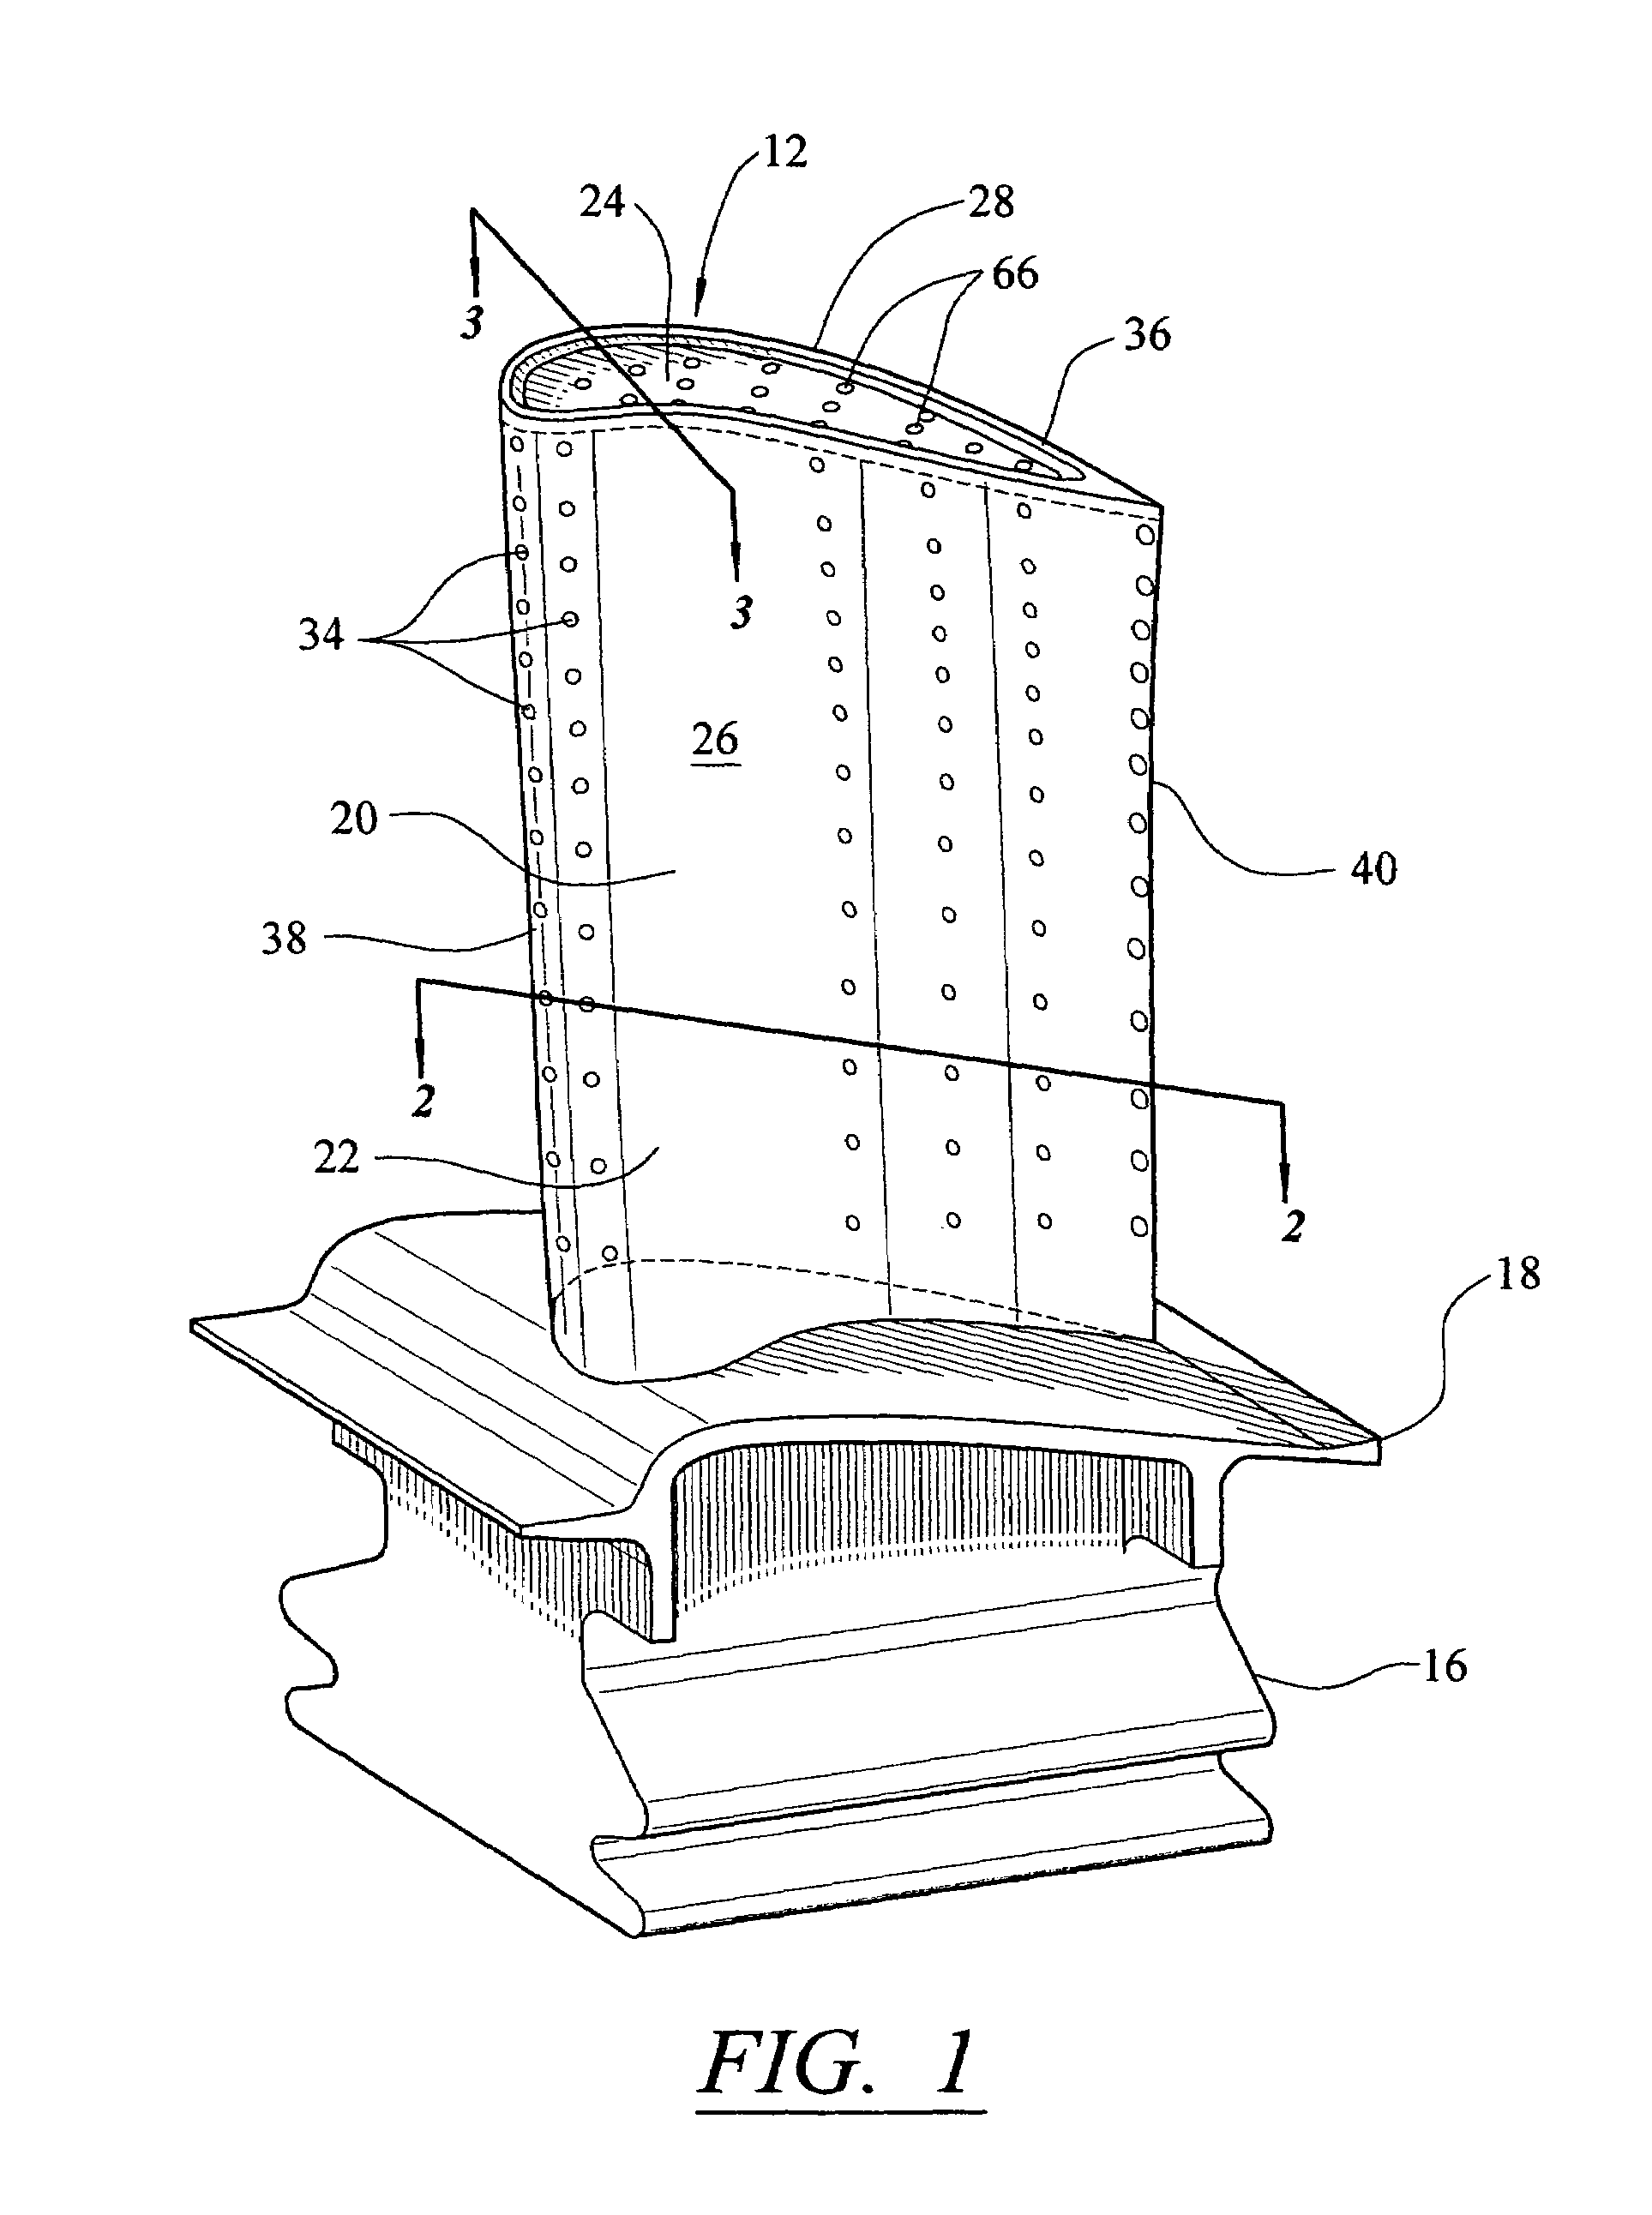 Vortex cooling system for a turbine blade